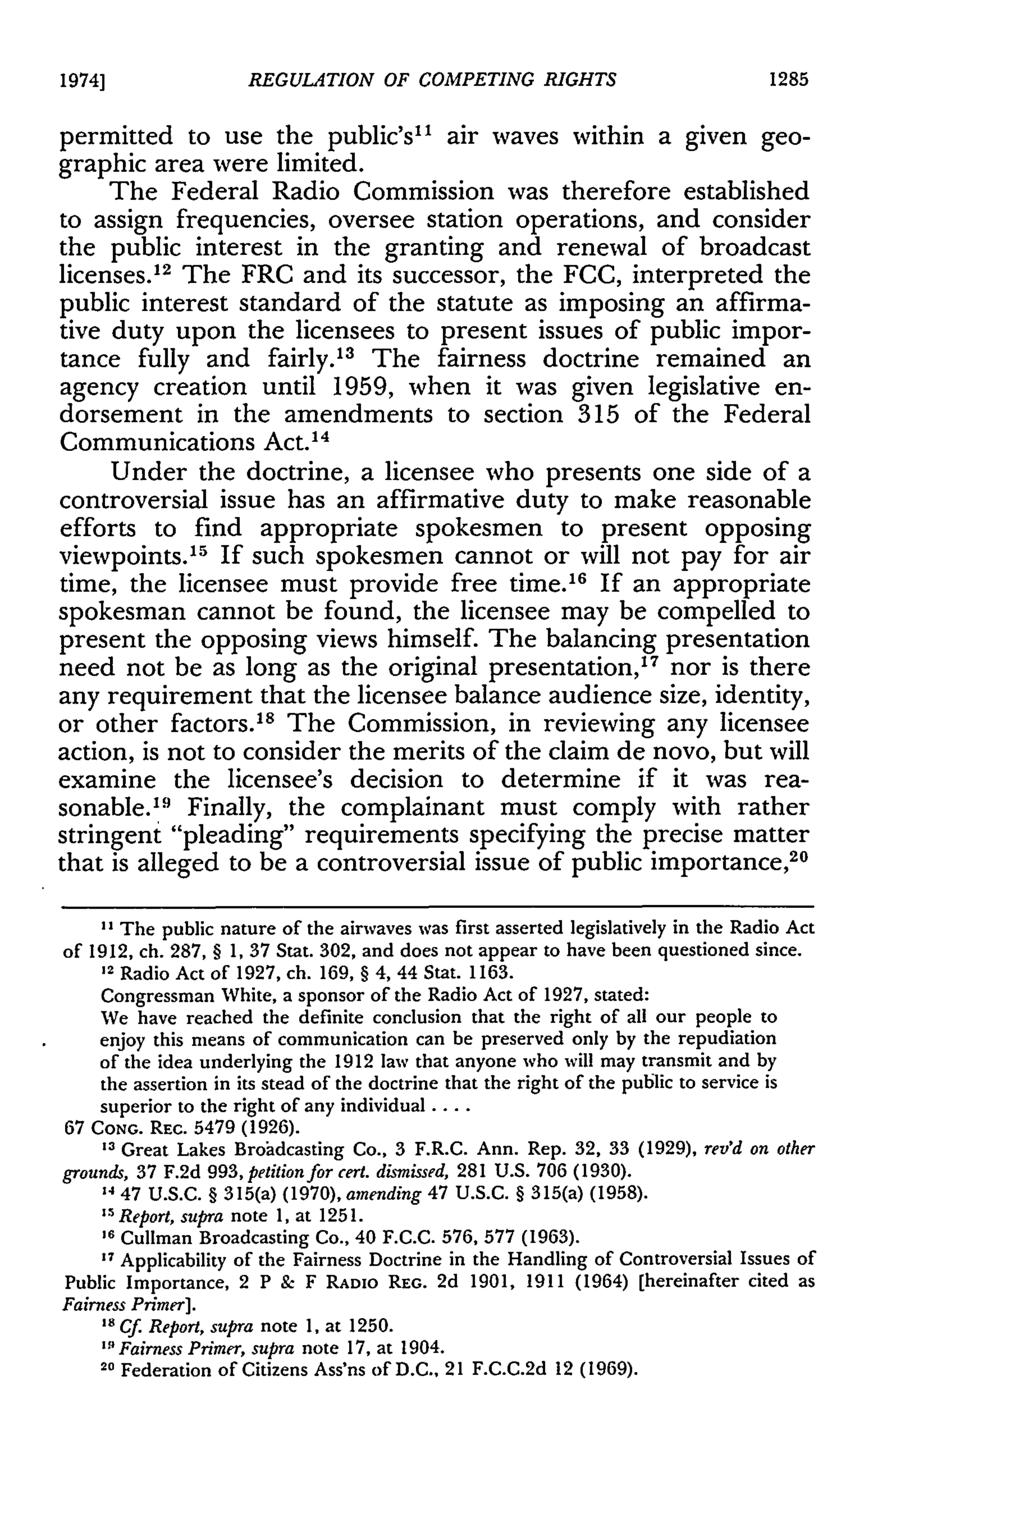 1974] REGULATION OF COMPETING RIGHTS permitted to use the public's" 1 air waves within a given geographic area were limited.